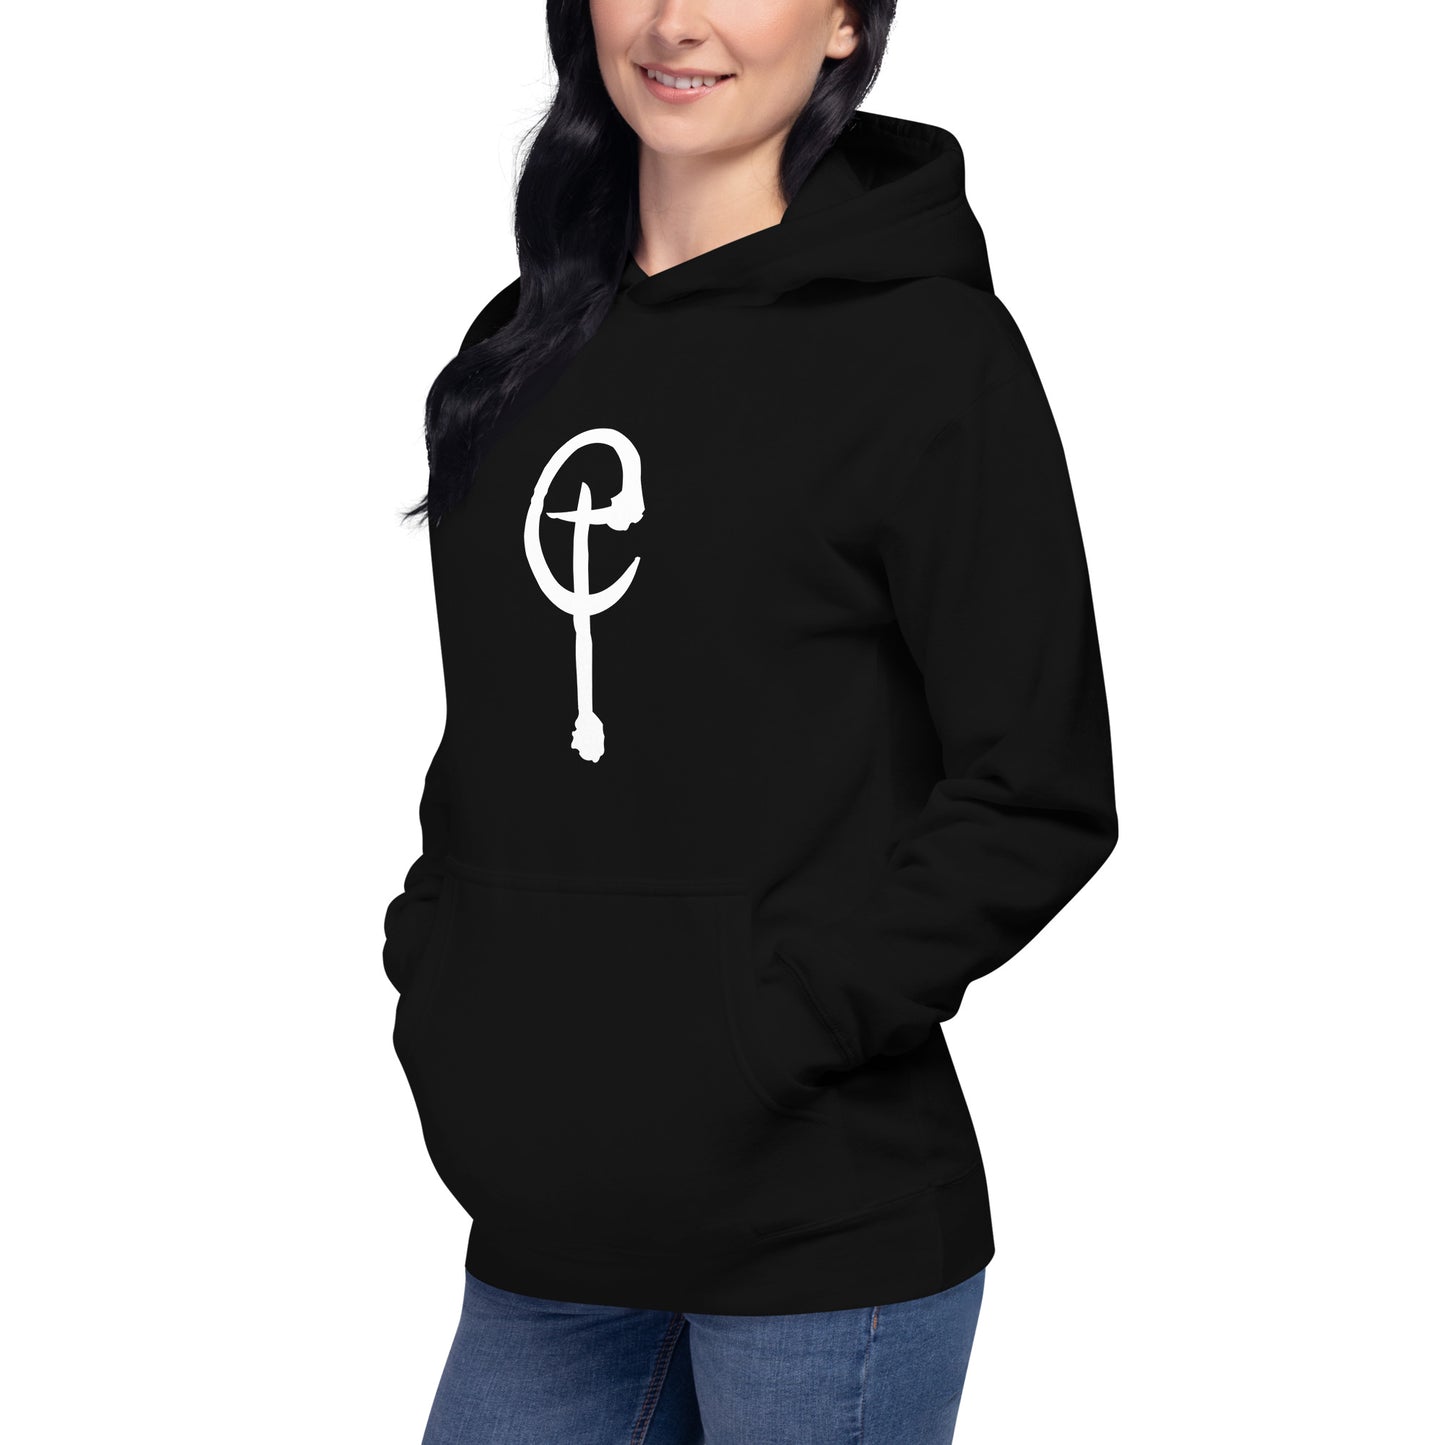 e:lect, official logo, Unisex Hoodie